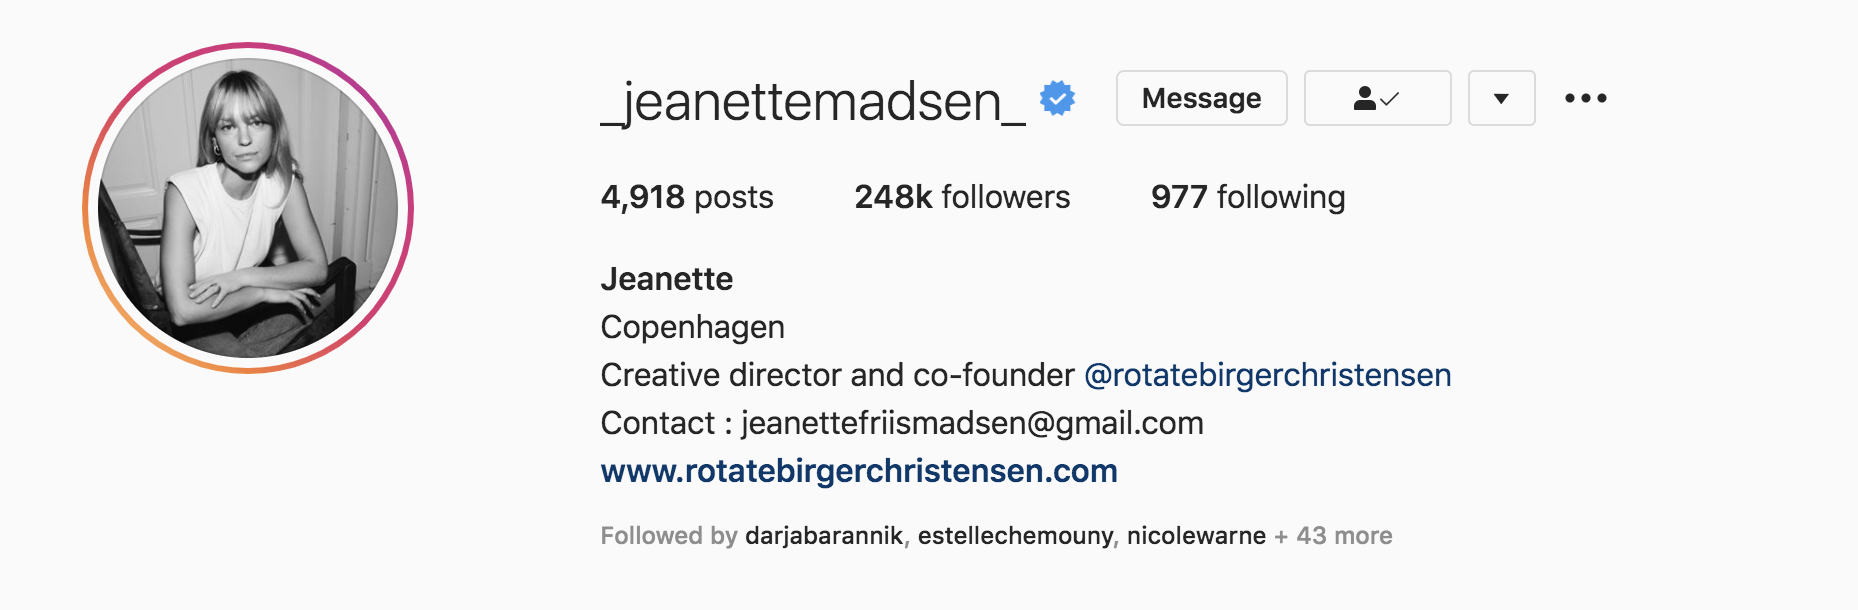 Top Fashion Influencers - Jeanette Madsen 